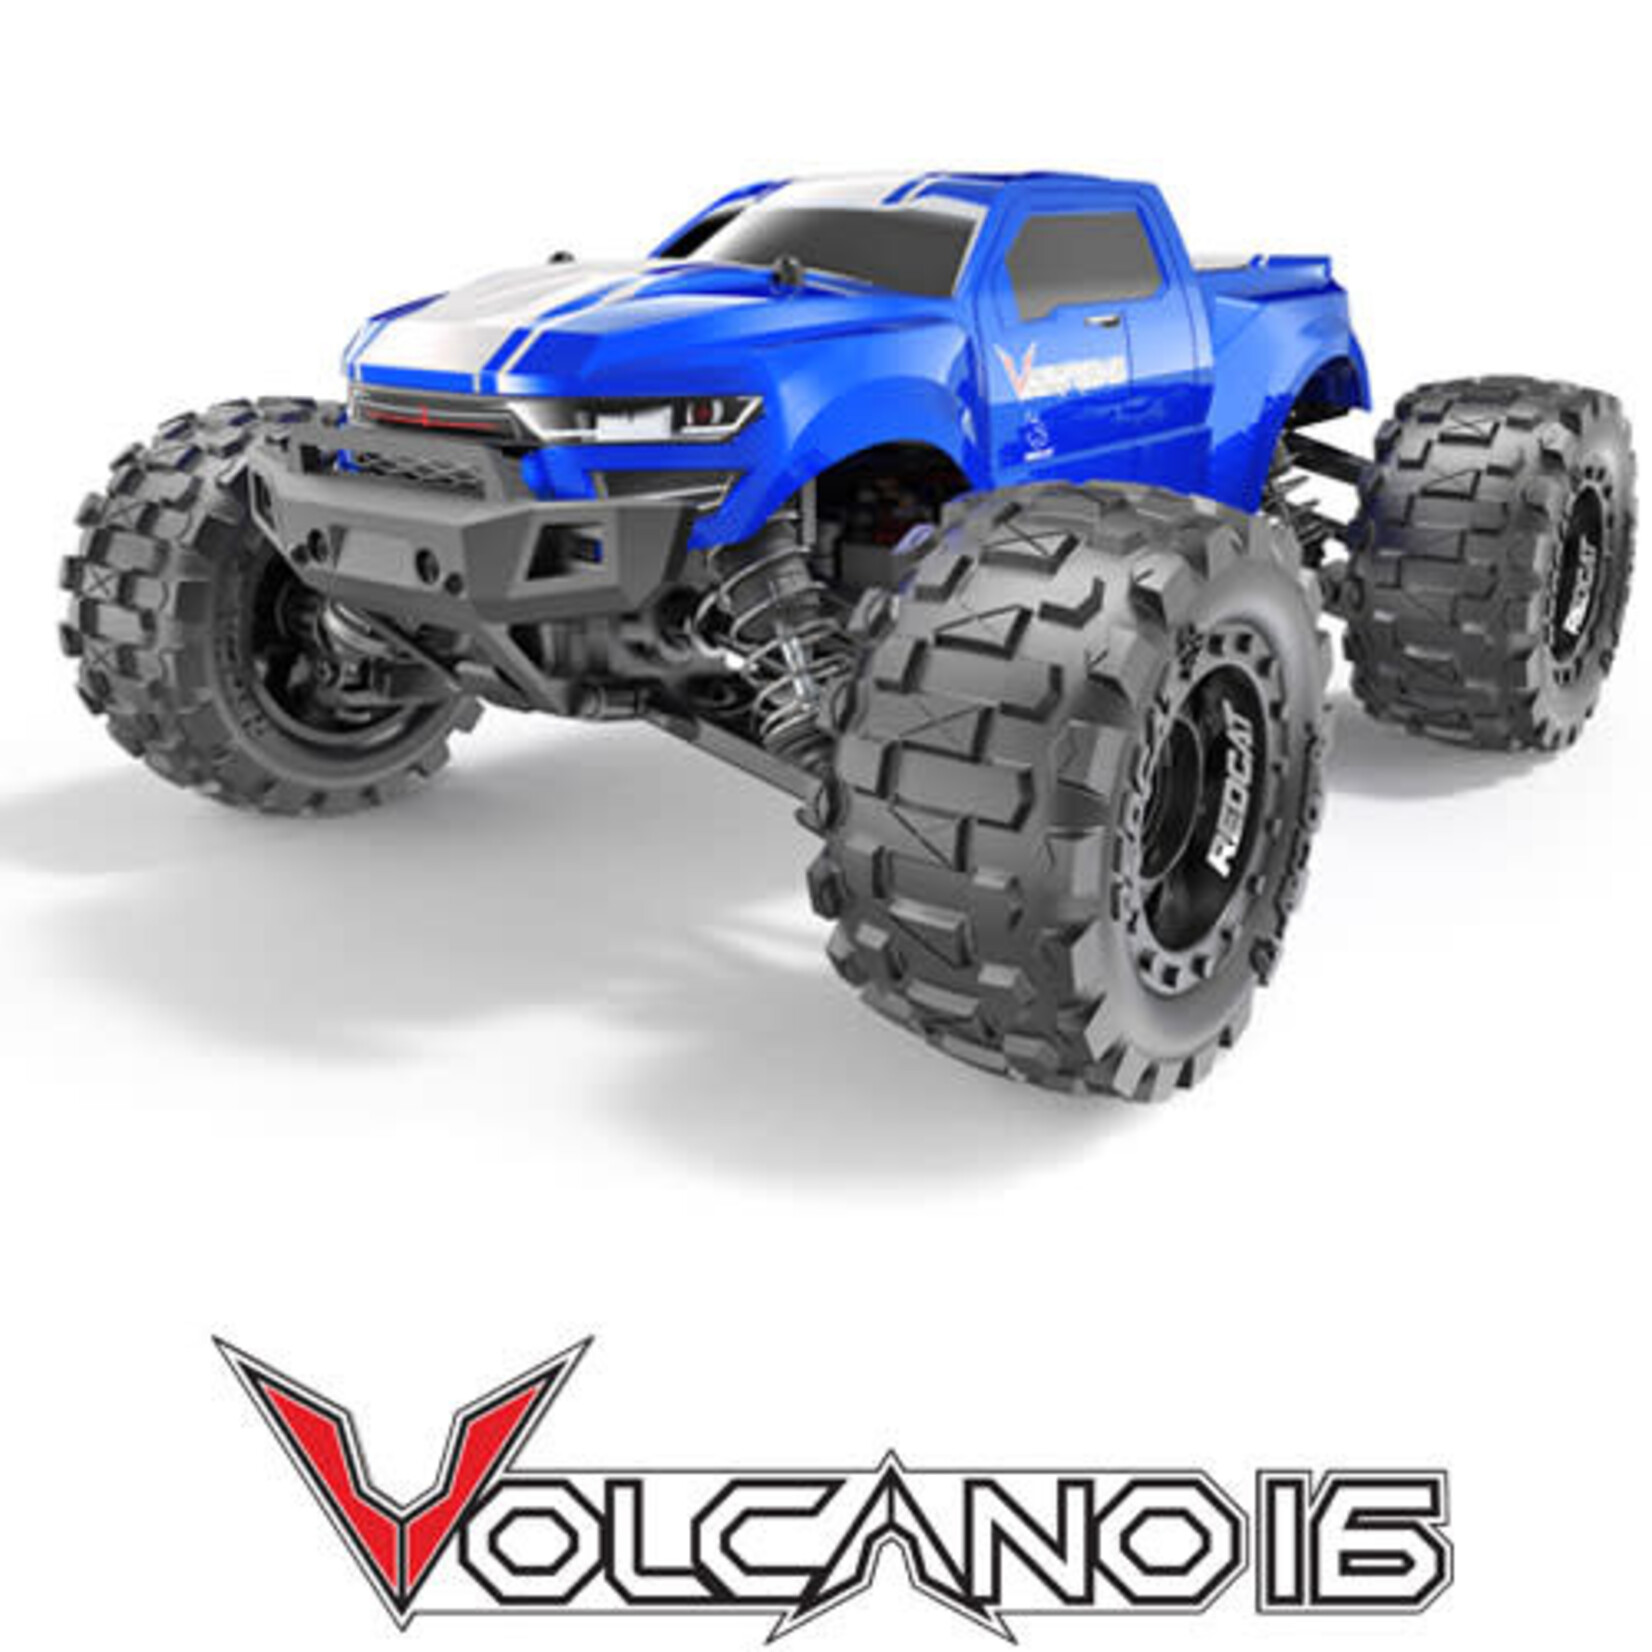 Redcat Racing RER13649  Redcat Volcano-16 1/16 Scale Brushed Monster Truck BLUE